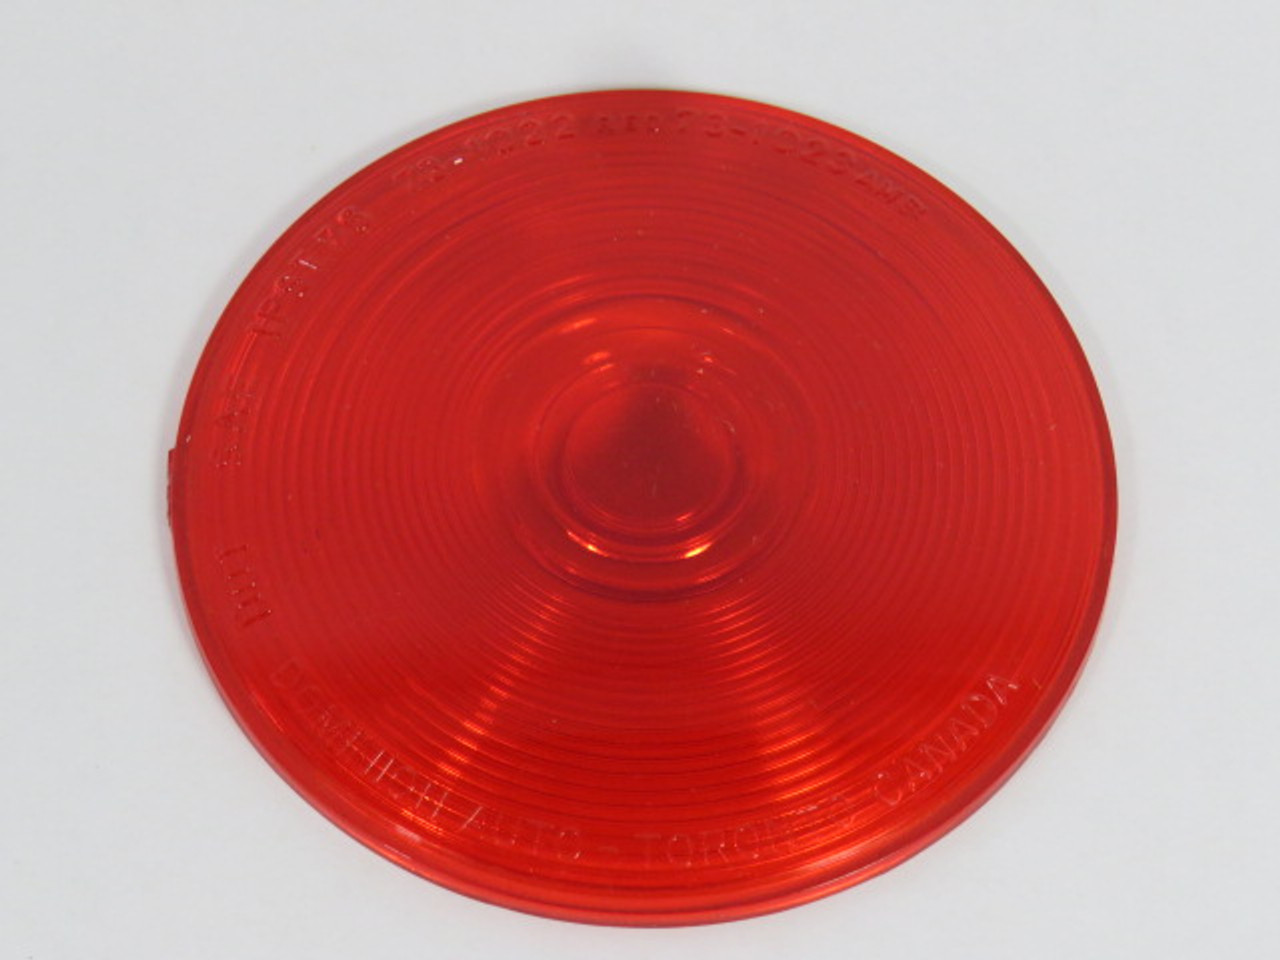 Dominion Auto 73-1022 Red Light Cover USED